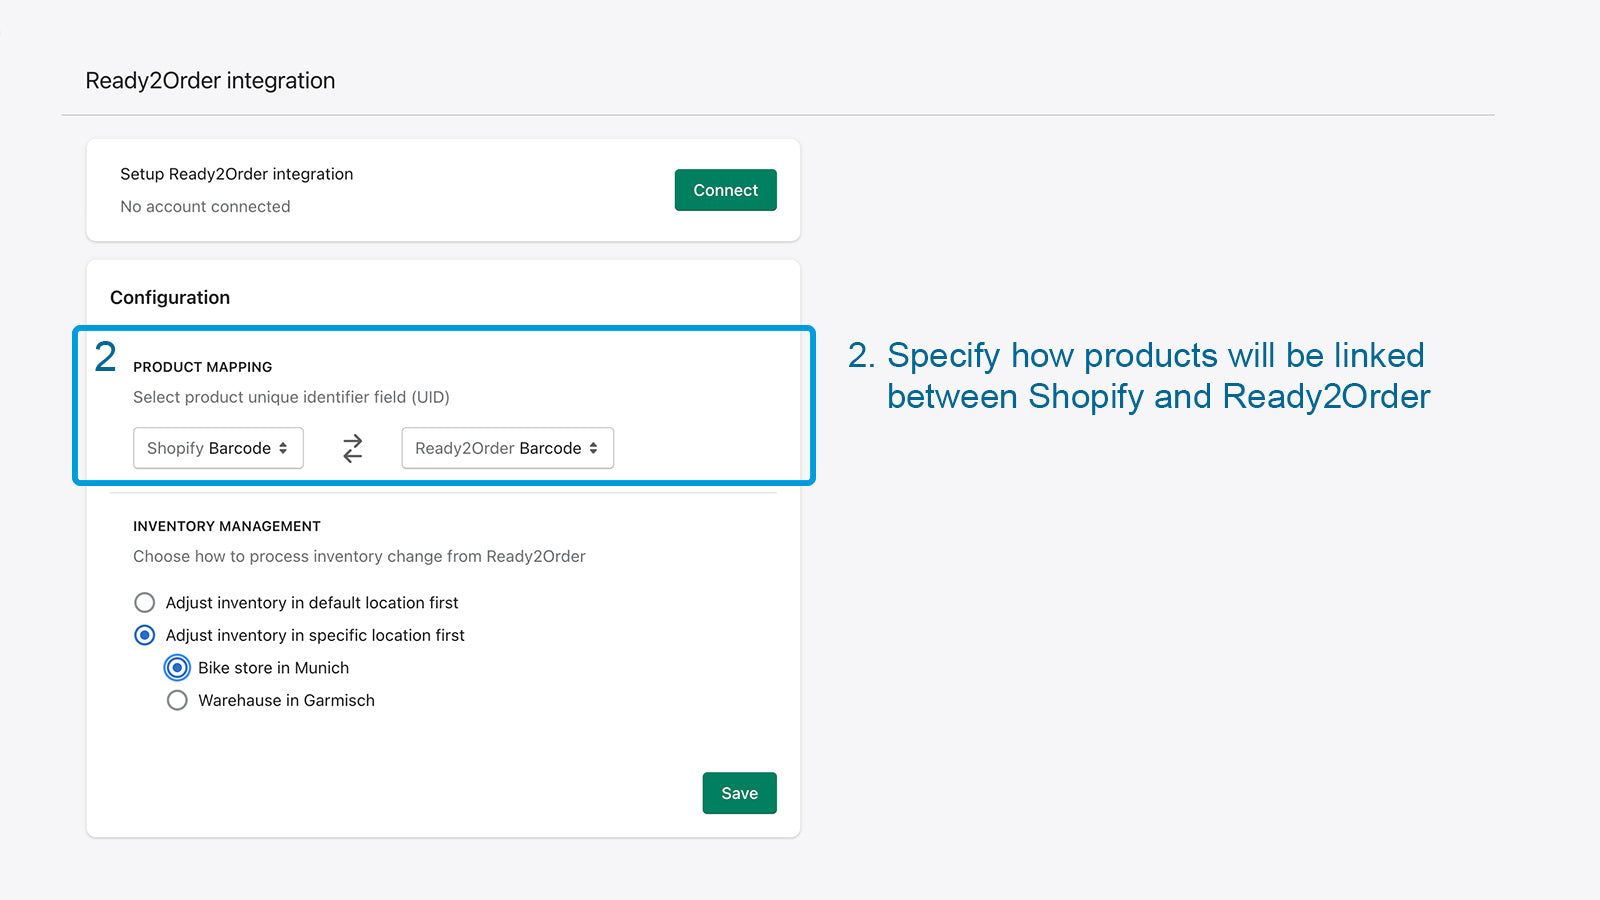 Specify how products are linked between Shopify and Ready2Order